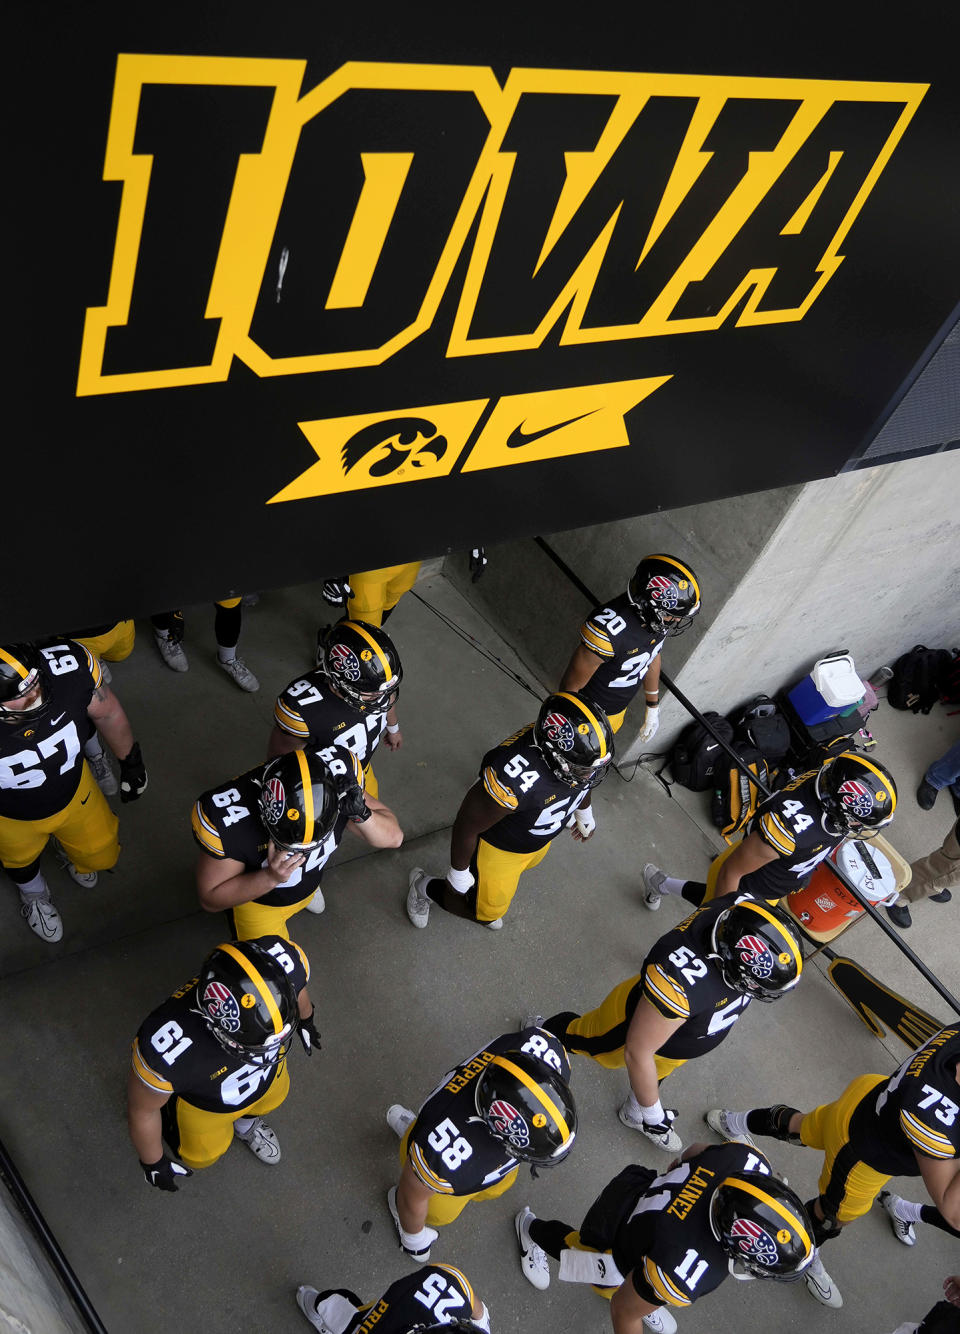 FILE - Members of the Iowa football team take the field prior to kickoff against Rutgers in an NCAA college football game, Saturday, Nov. 11, 2023, in Iowa City, Iowa. An Iowa criminal investigator suggested to colleagues last year that busting college athletes for online sports betting would impress the public and “the powers that be” and also nudge the state legislature toward updating gambling laws. Five starters on the Iowa State football team and a number of Iowa football and basketball players were among athletes criminally charged or suspended by the NCAA. (AP Photo/Bryon Houlgrave, File)